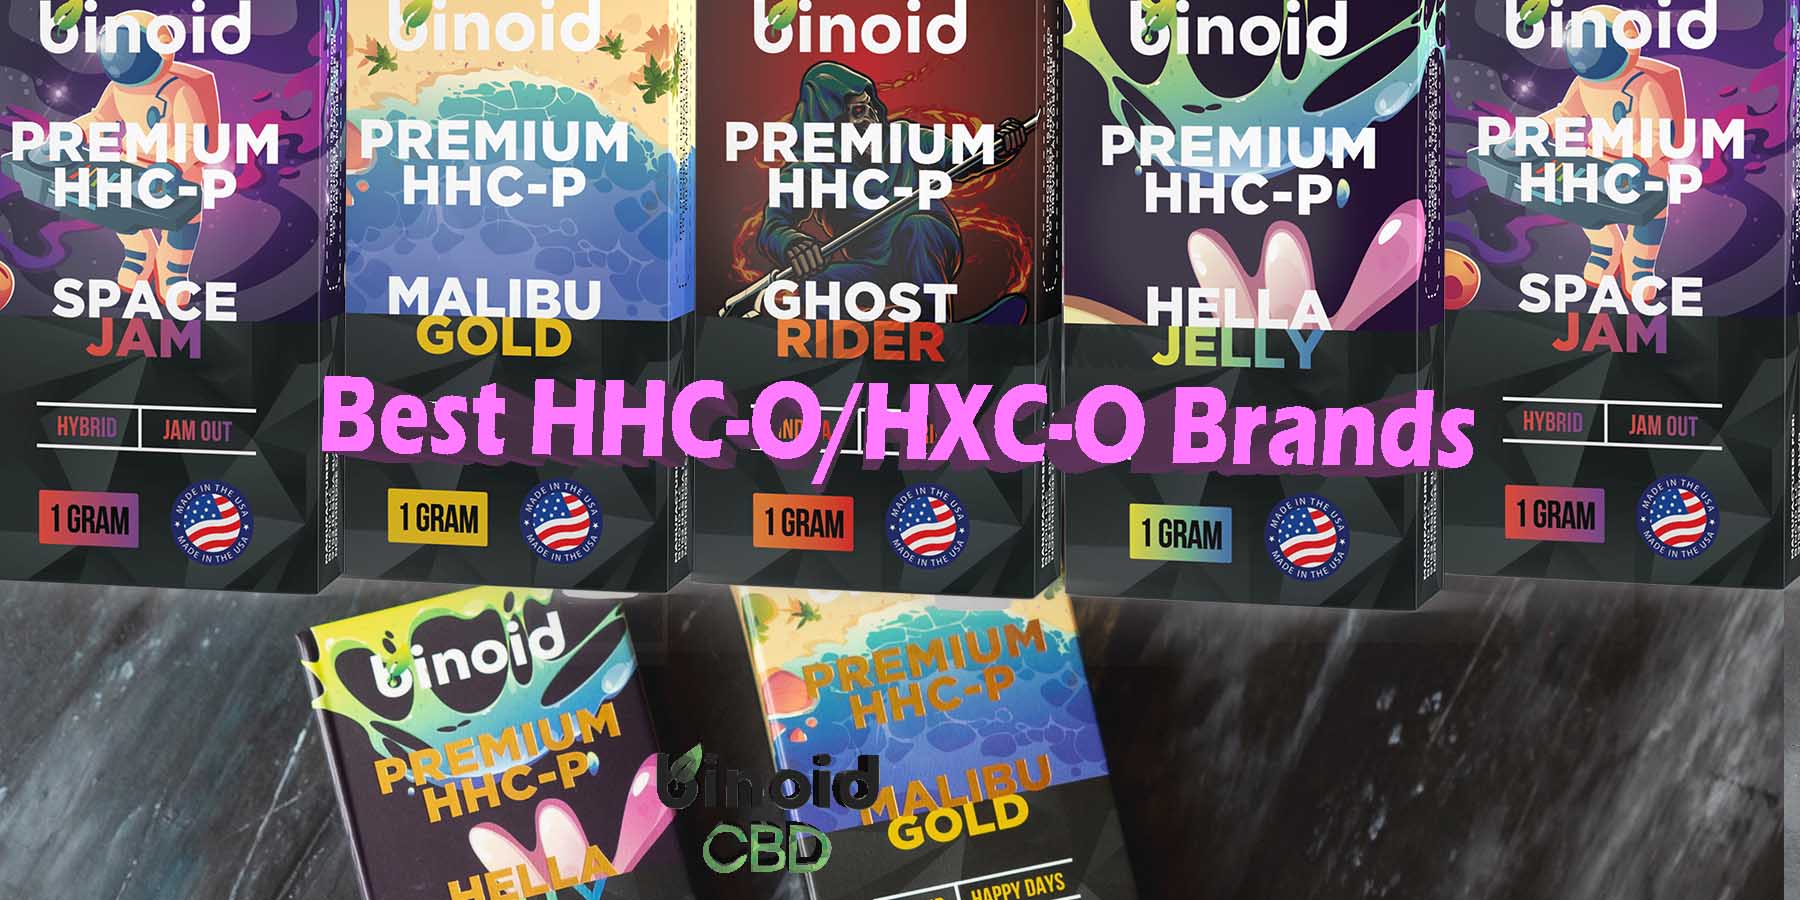 Best HHC-O HXC-O-Brands Best Disposable Cartridges Vape 2 Gram Review Gram Take Work Online Best Brand Price Get Near Me Lowest Coupon Discount Store Shop Vapes Carts Online